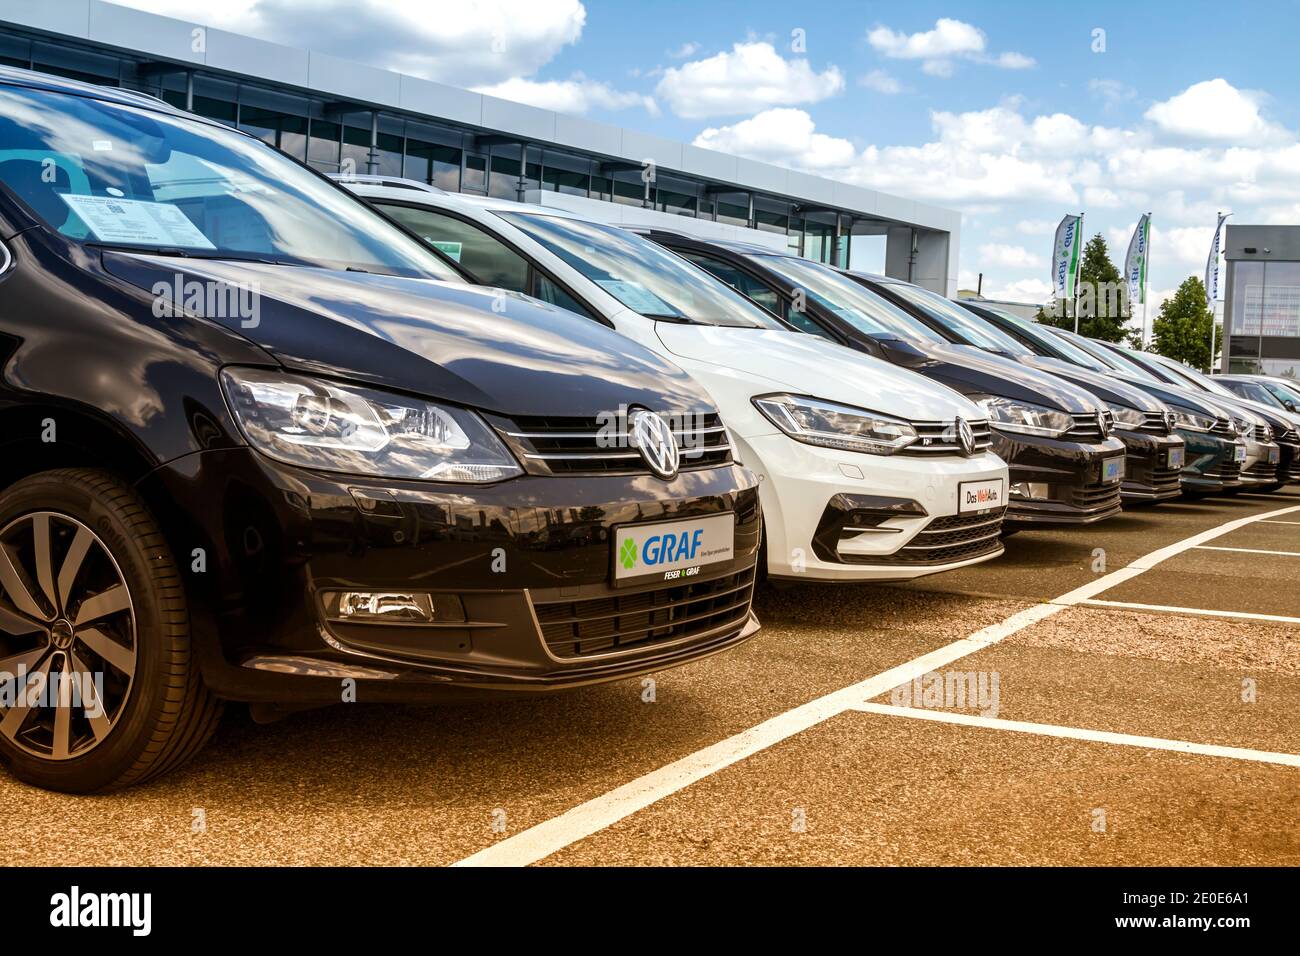 Furth, Germany : Volkswagen group dealership and service, Skoda, Seat and Volkswagen. Stock Photo